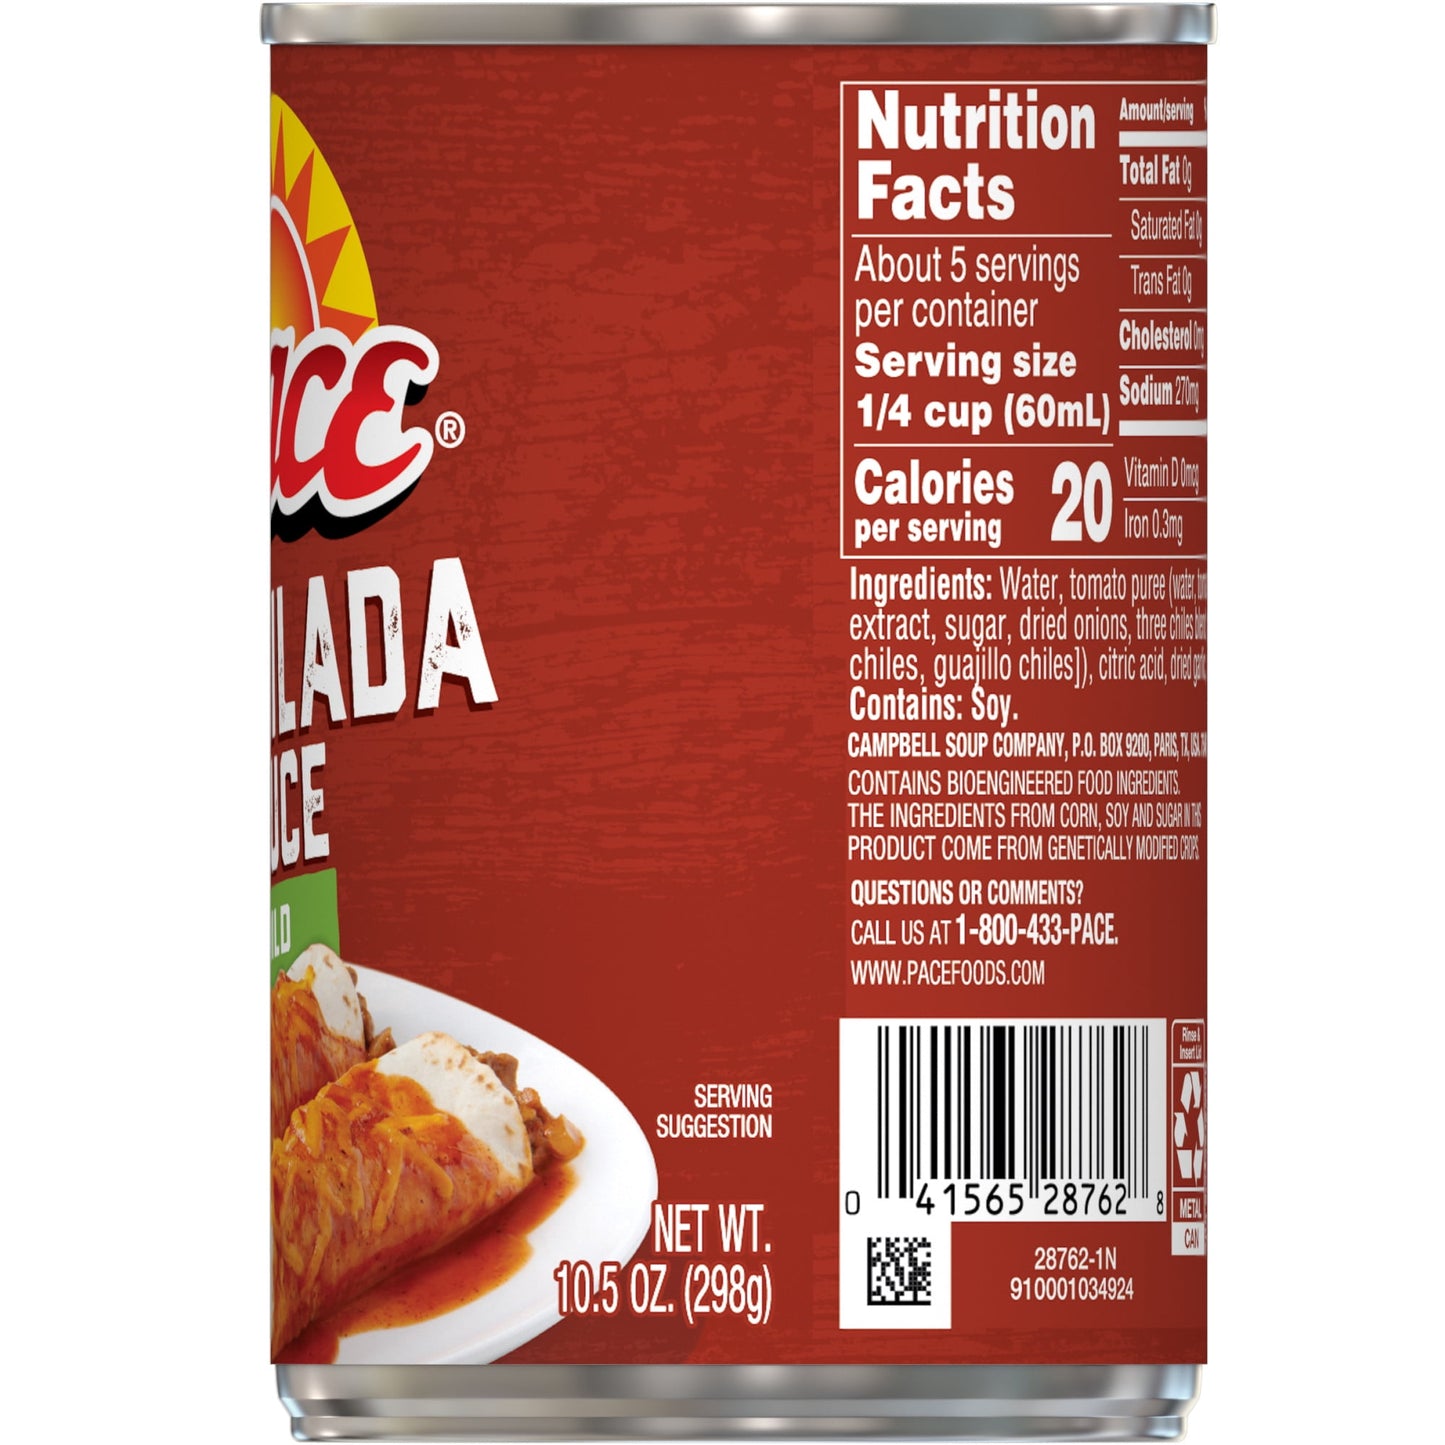 Pace Mild Red Enchilada Sauce, 10.5 oz Can